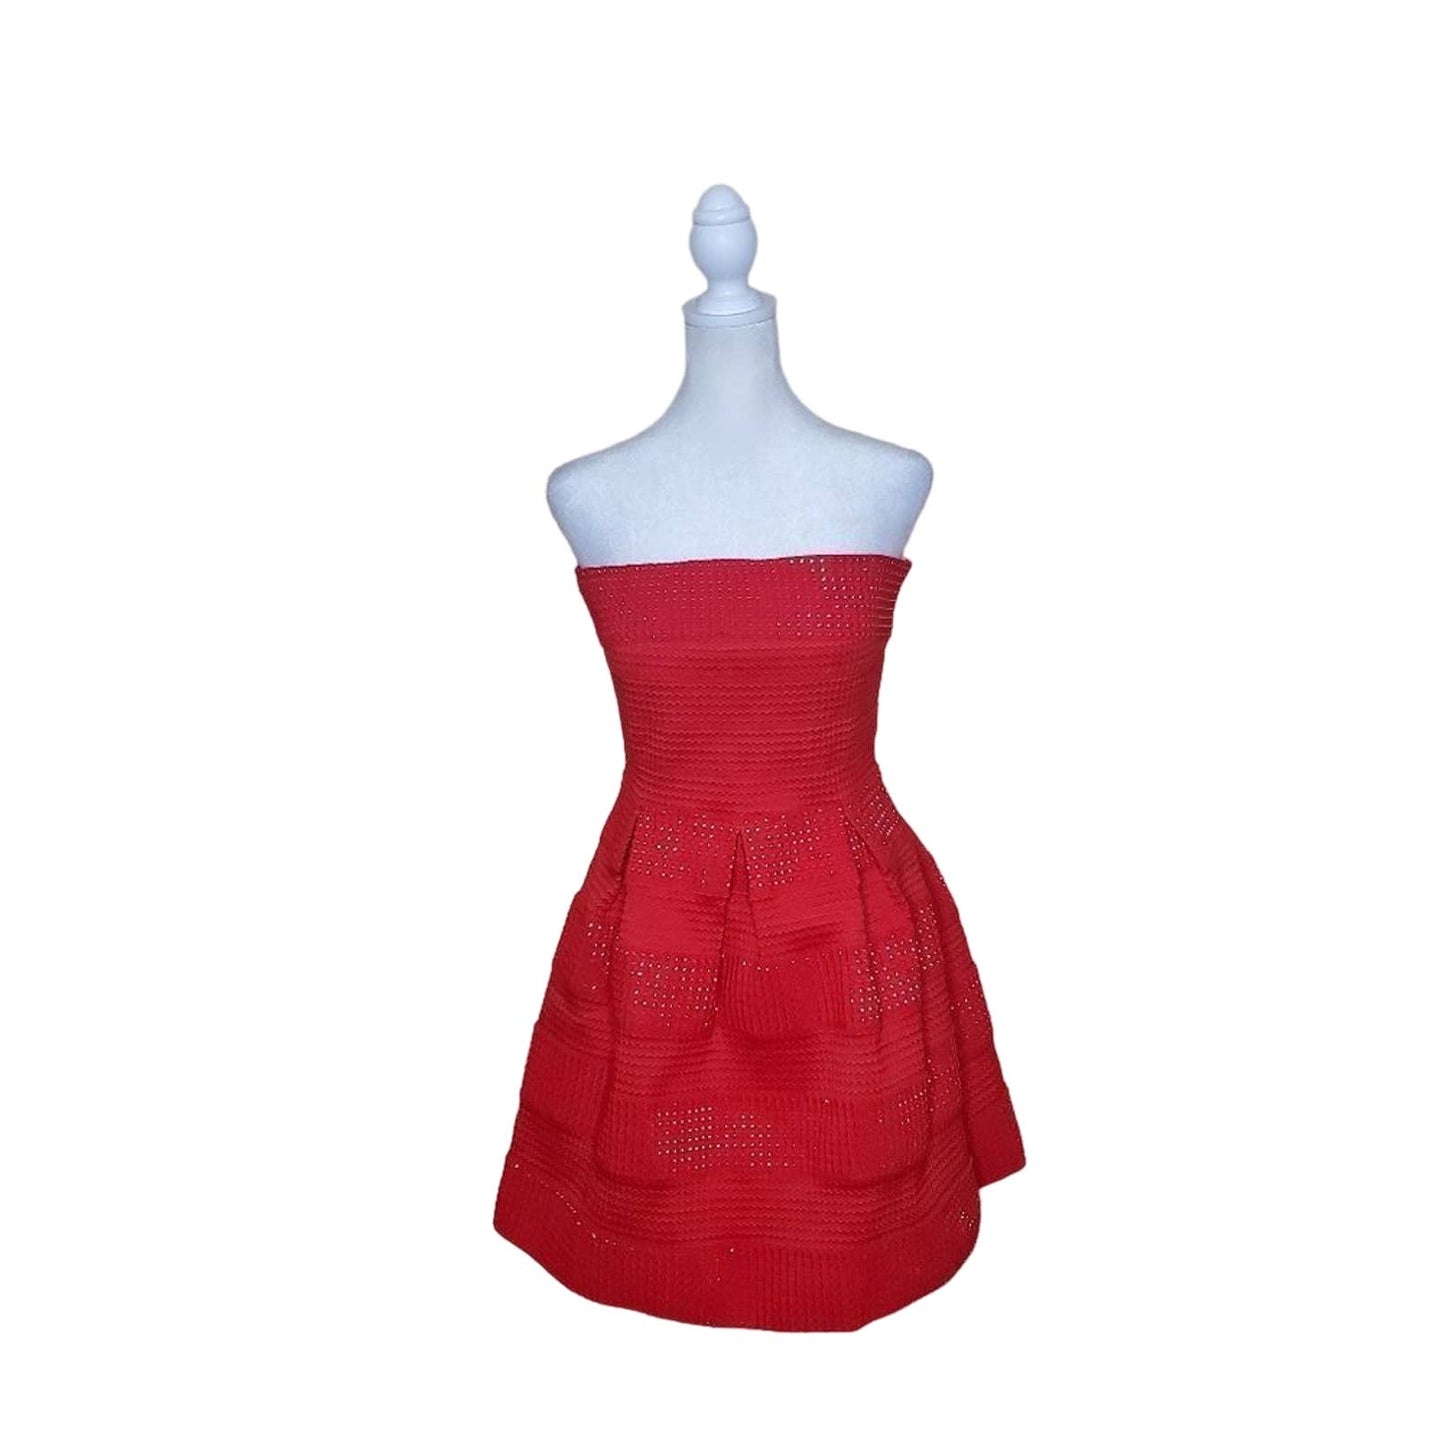 No Brand Strapless Red Mini Dress with Sparkle Detail, Size 2-4